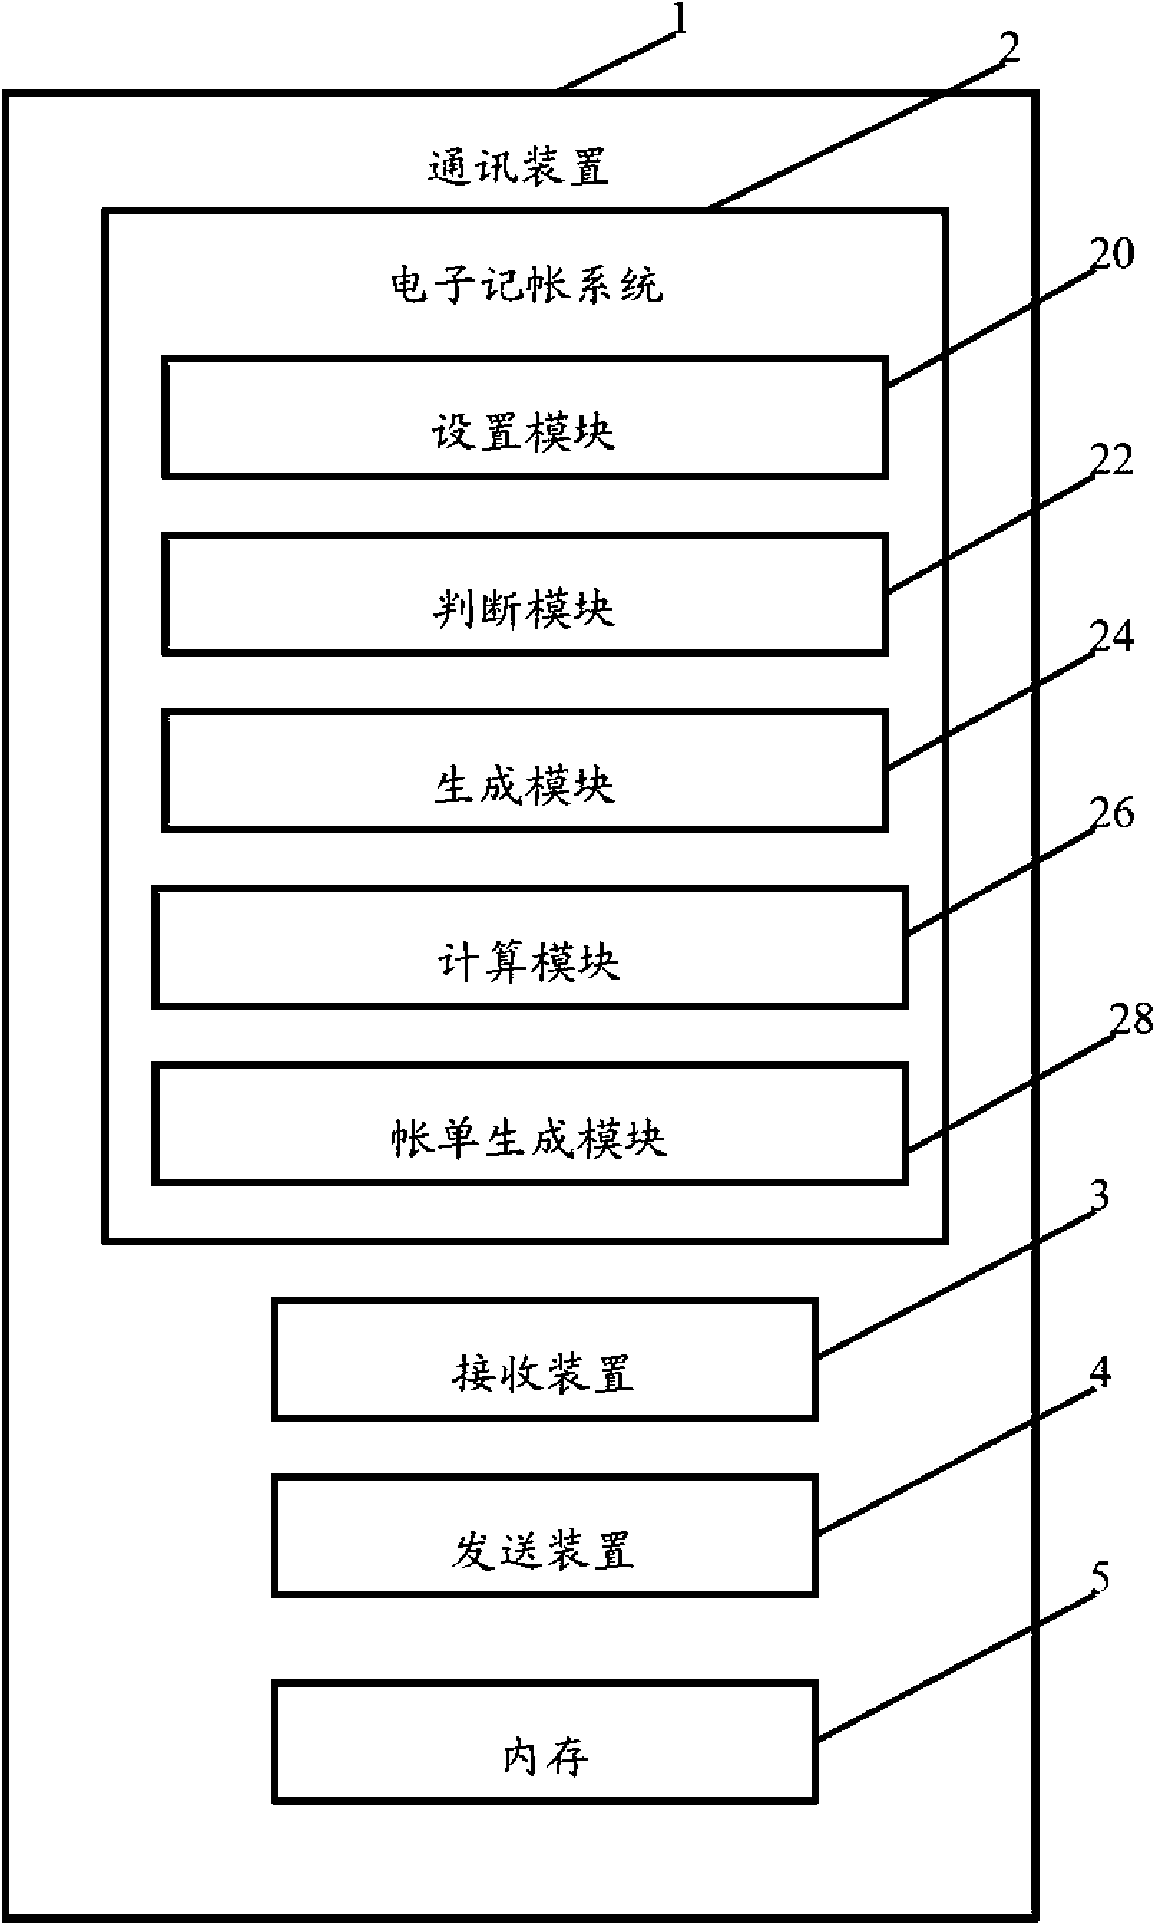 Electronic accounting system and method therefor